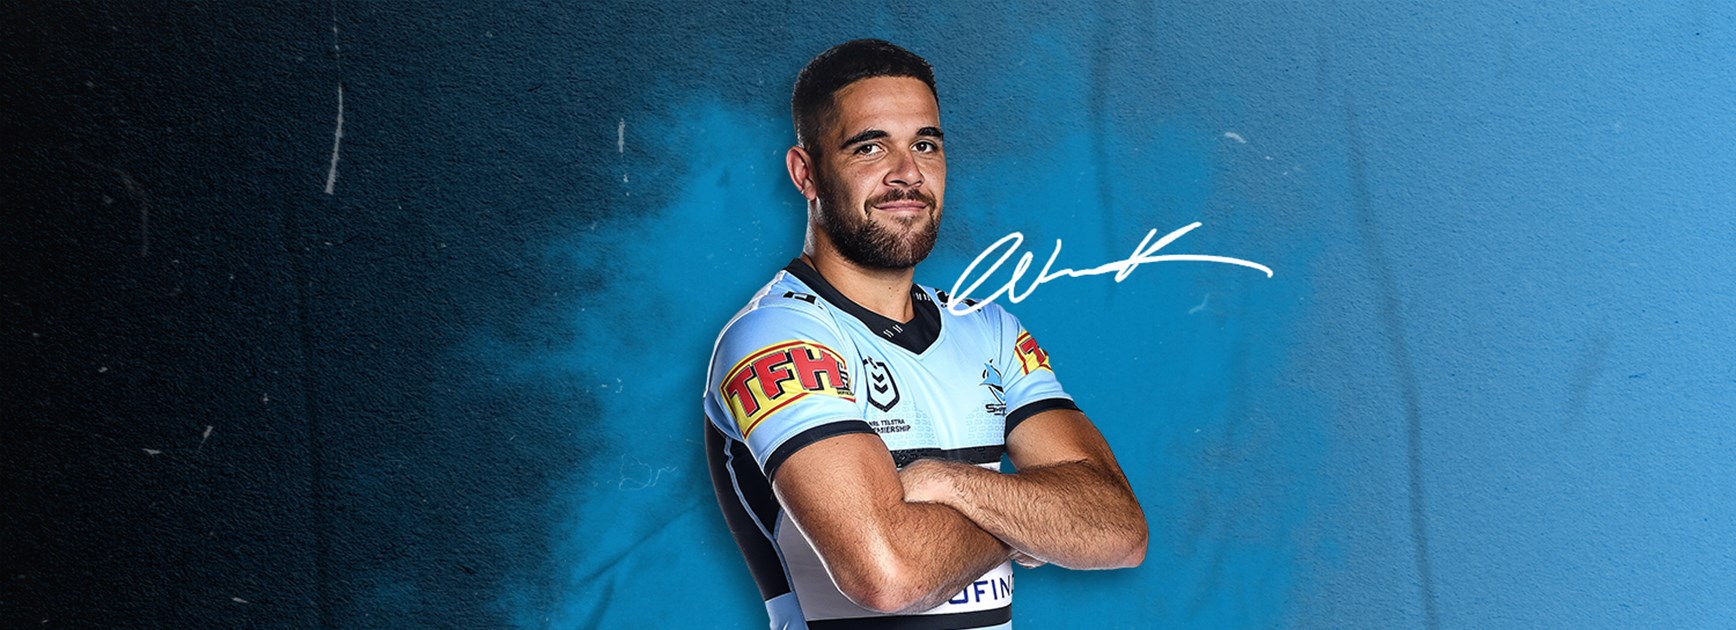 Kennedy re-signs for 2021